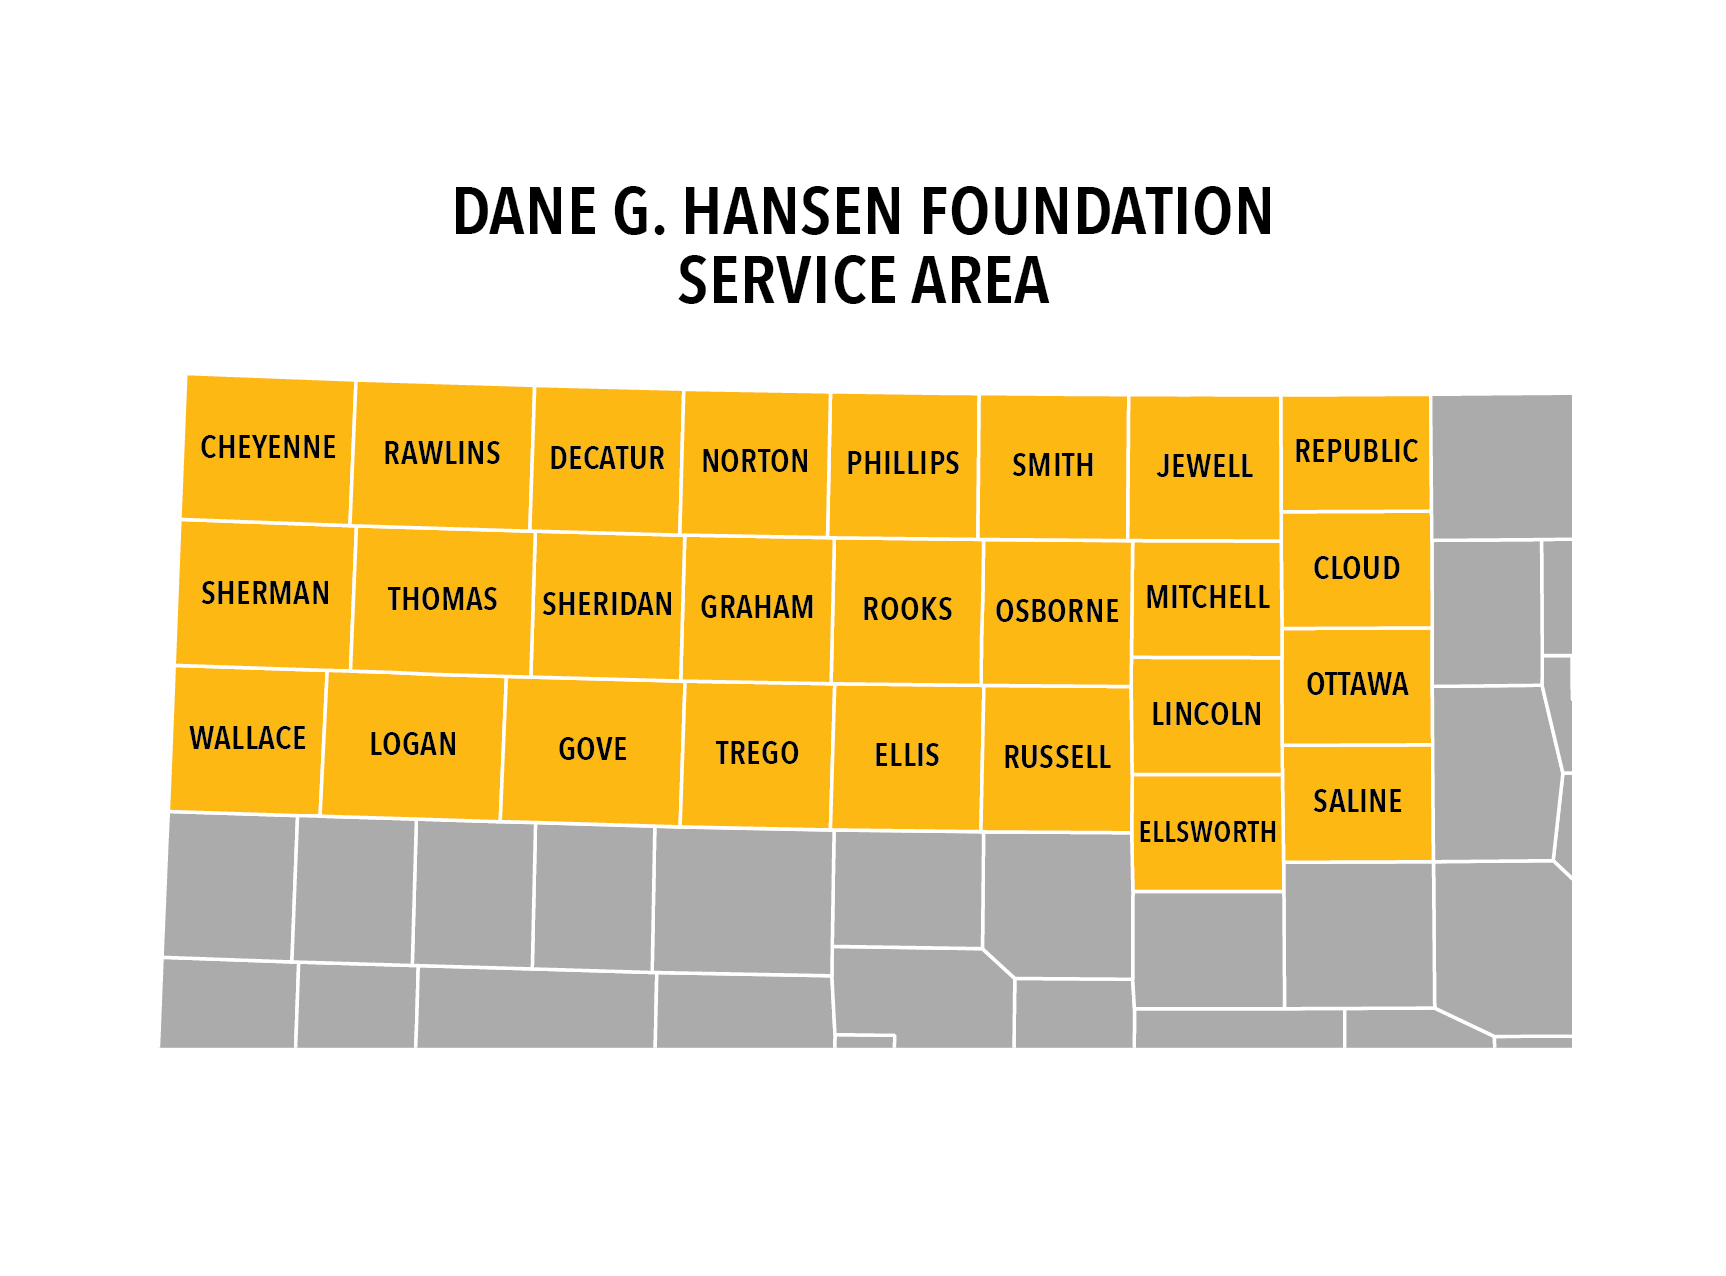 Employers must come from the Dane G. Hansen Foundation service area. Student applicants are not geographically restricted.